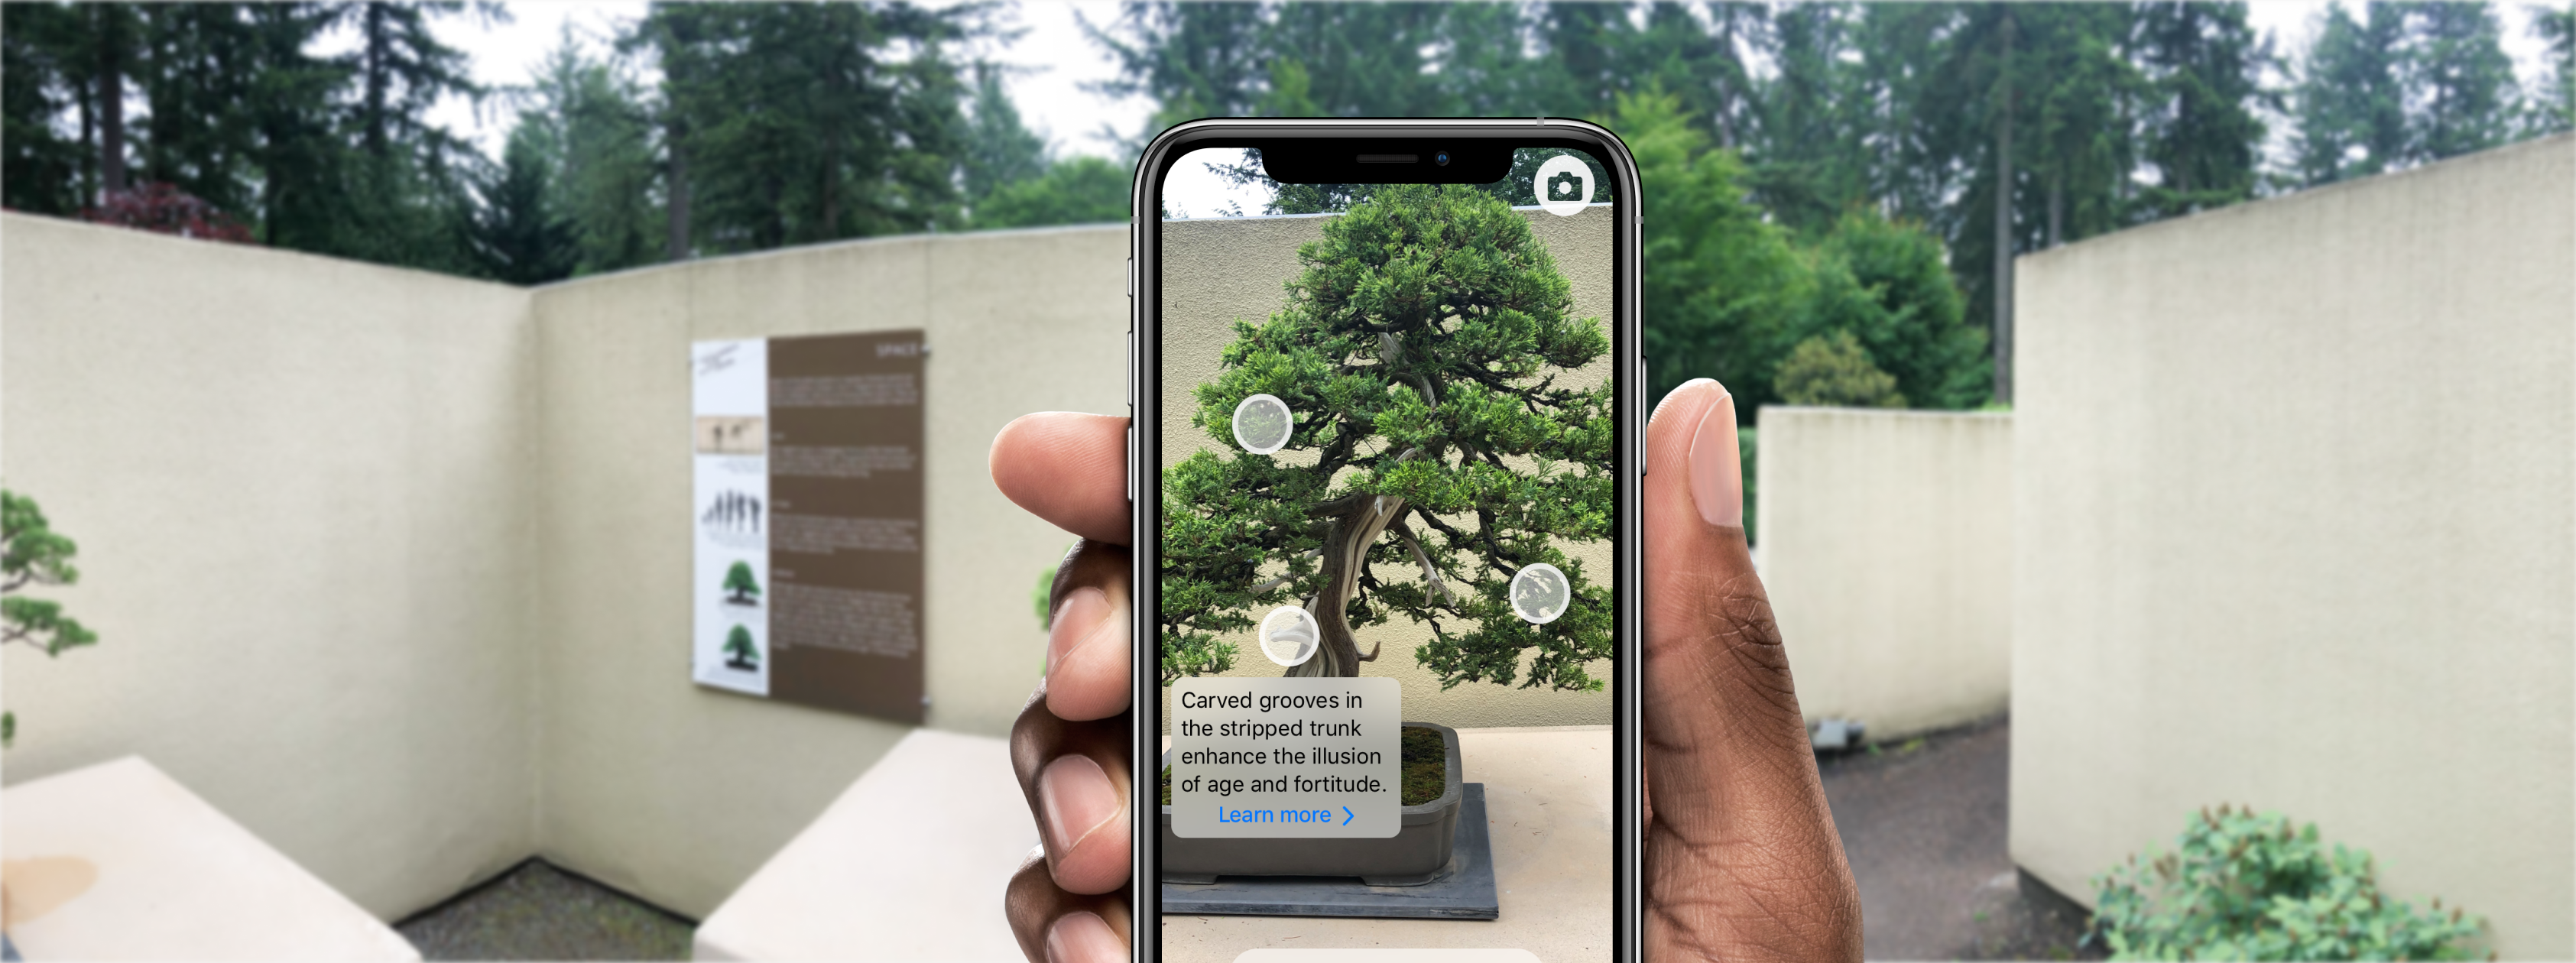 Image with device mockup at bonsai museum.